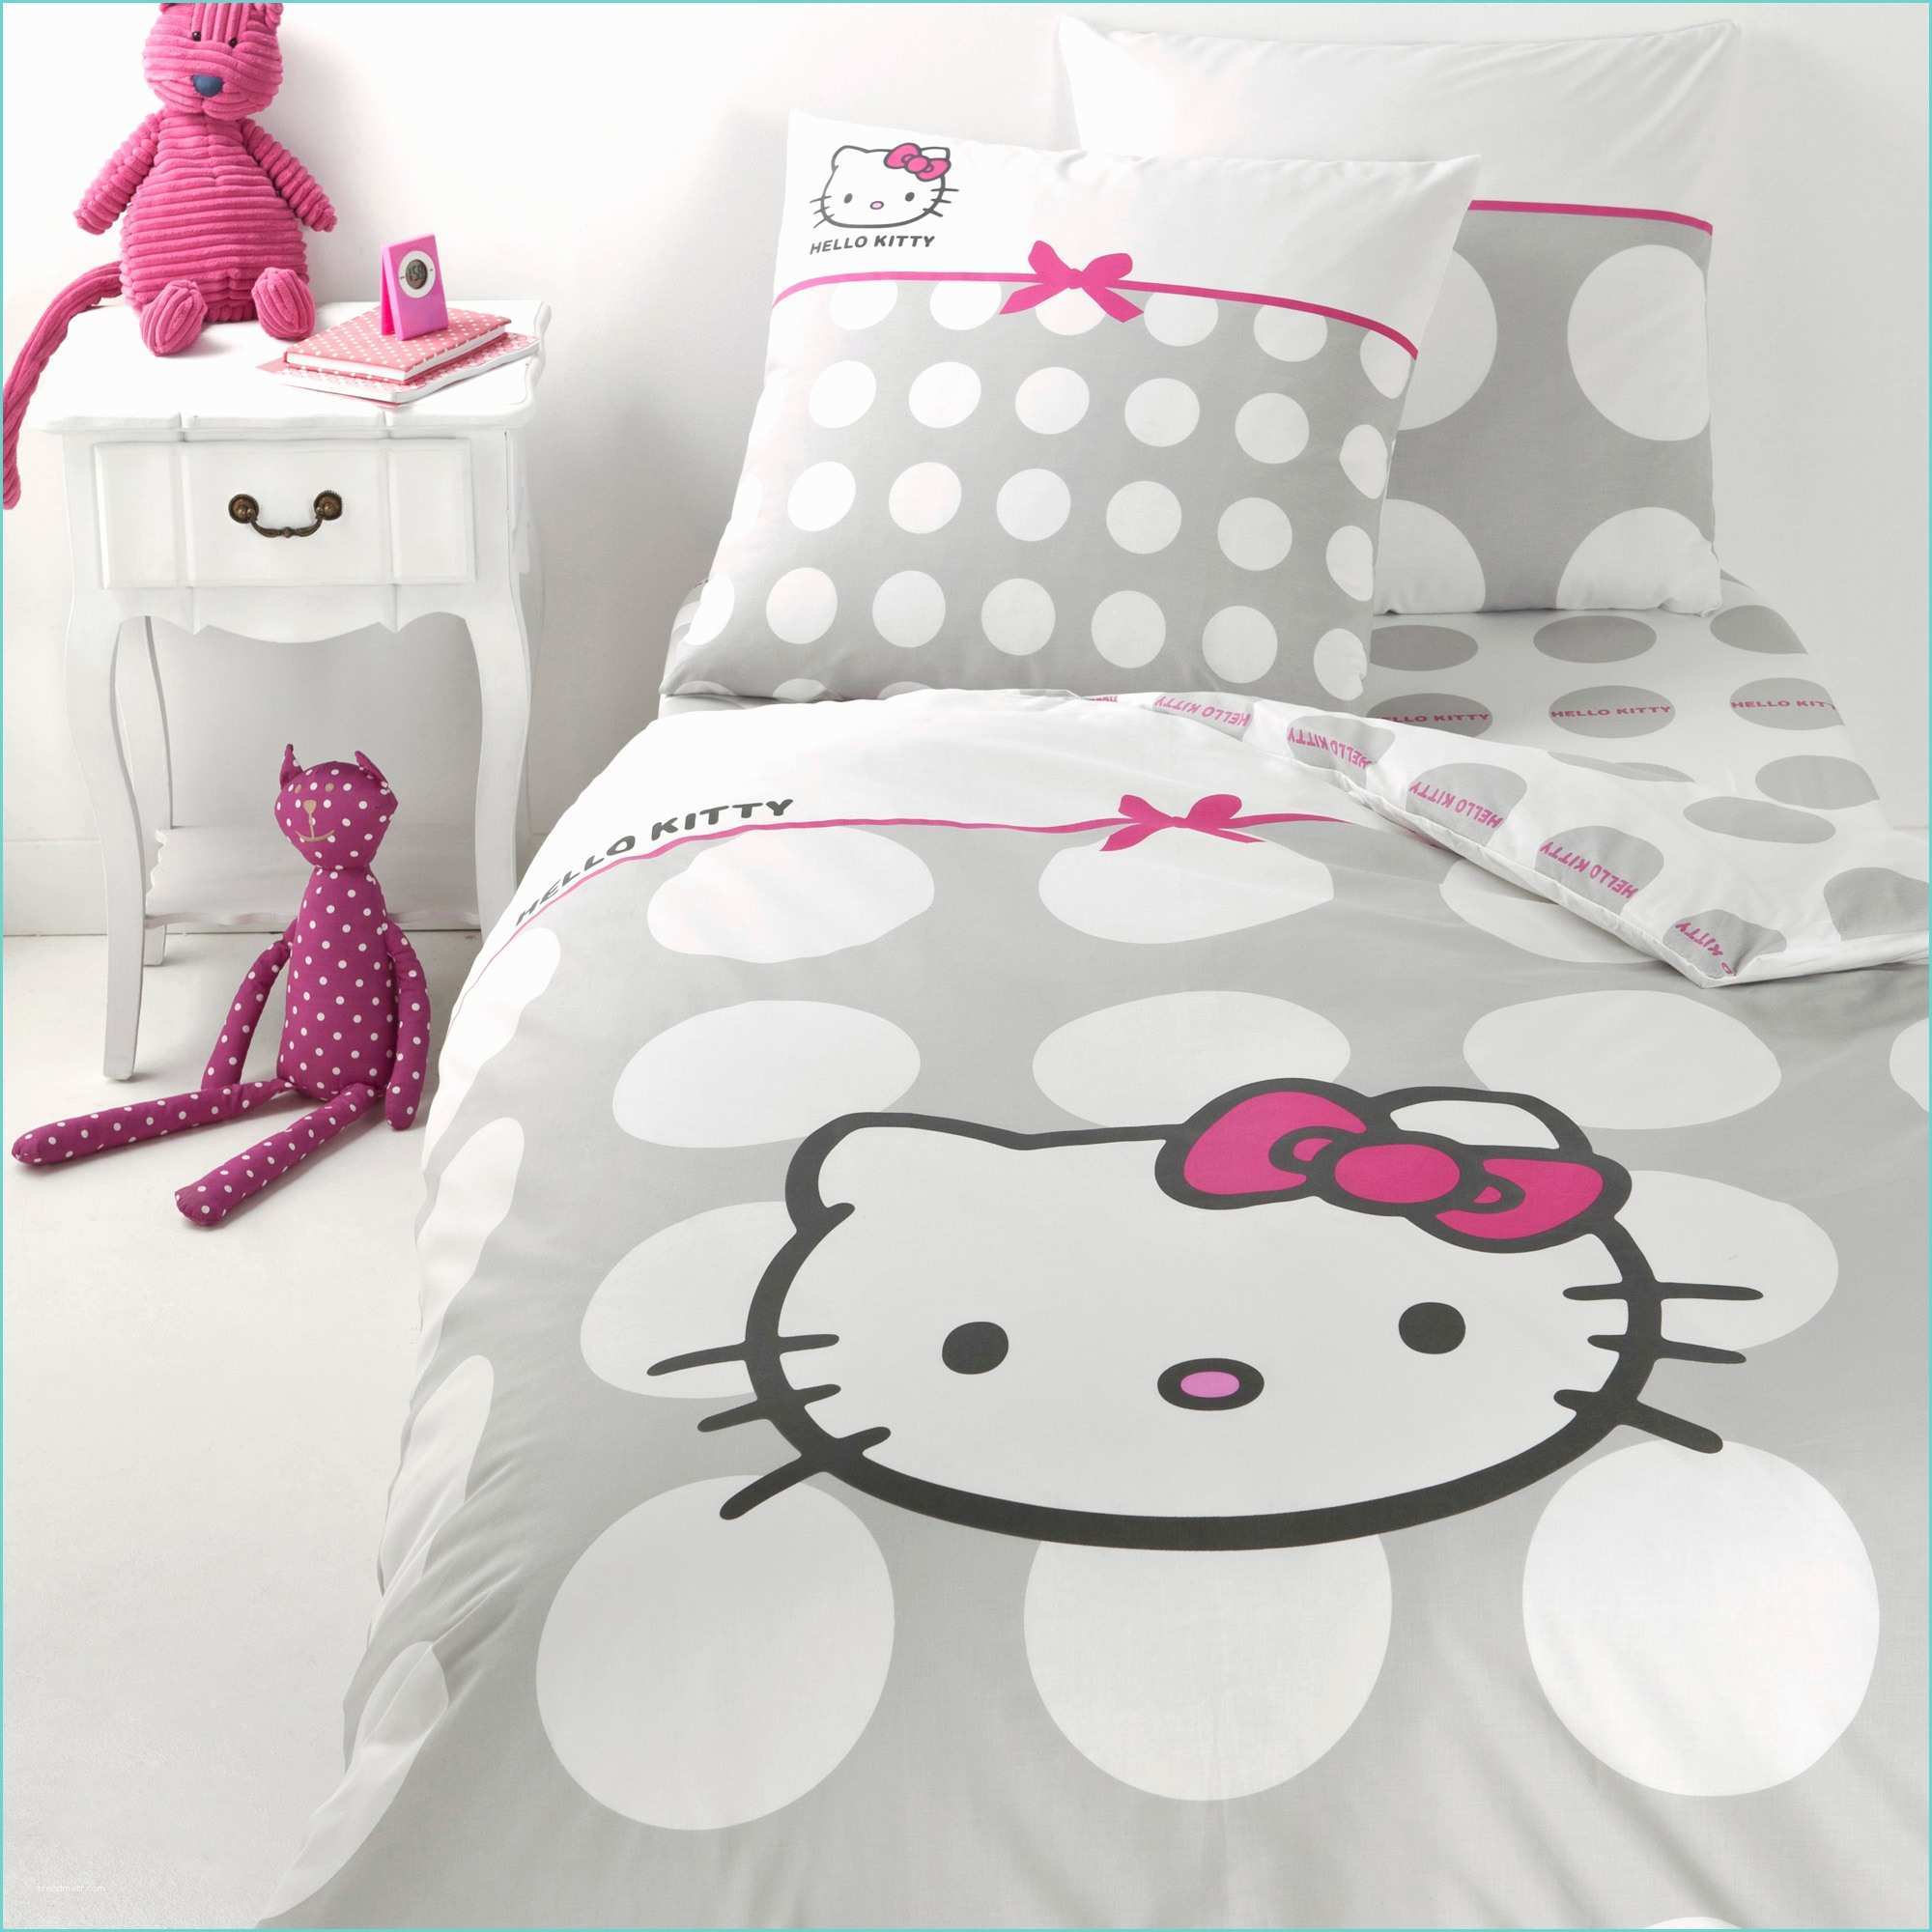 Housse De Couette Hello Kitty Housse Couette Hello Kitty